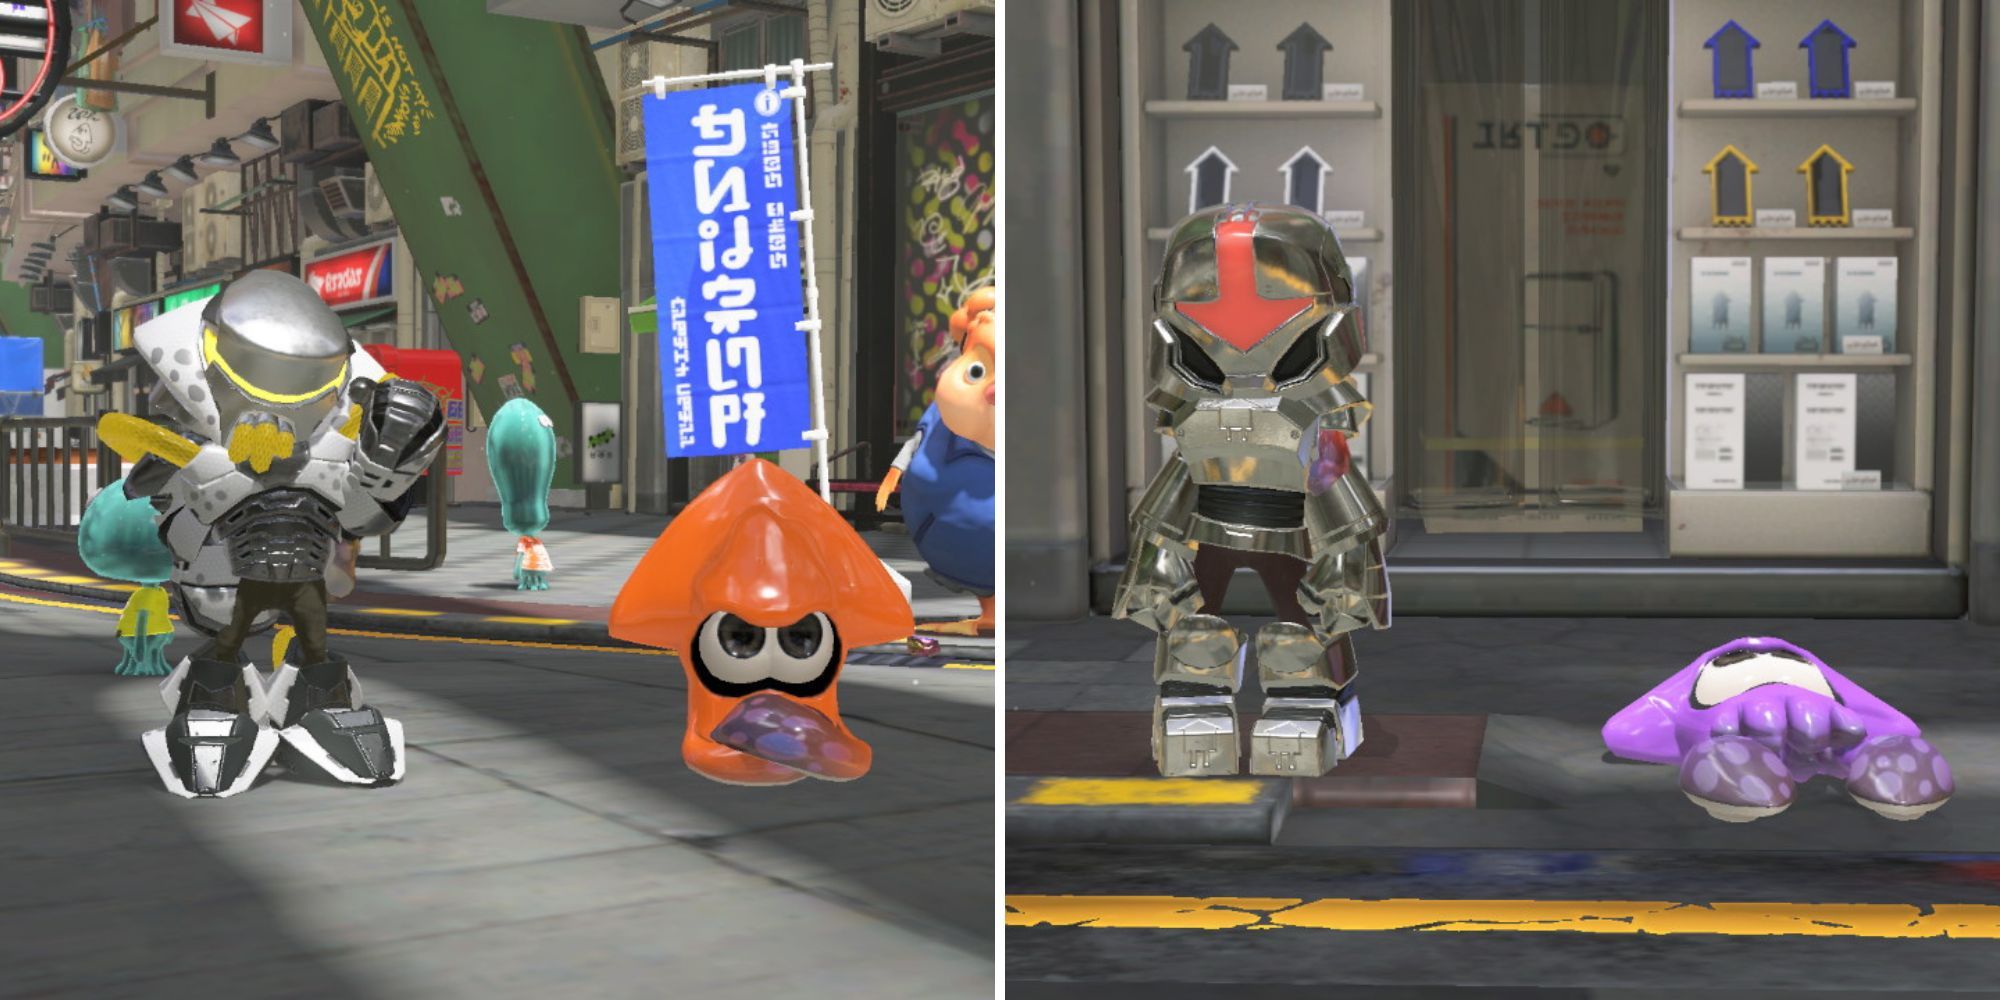 An Inkling wearing the Power Outfit beside an orange squid and an Inkling wearing the Mk Power Outfit beside a purple squid